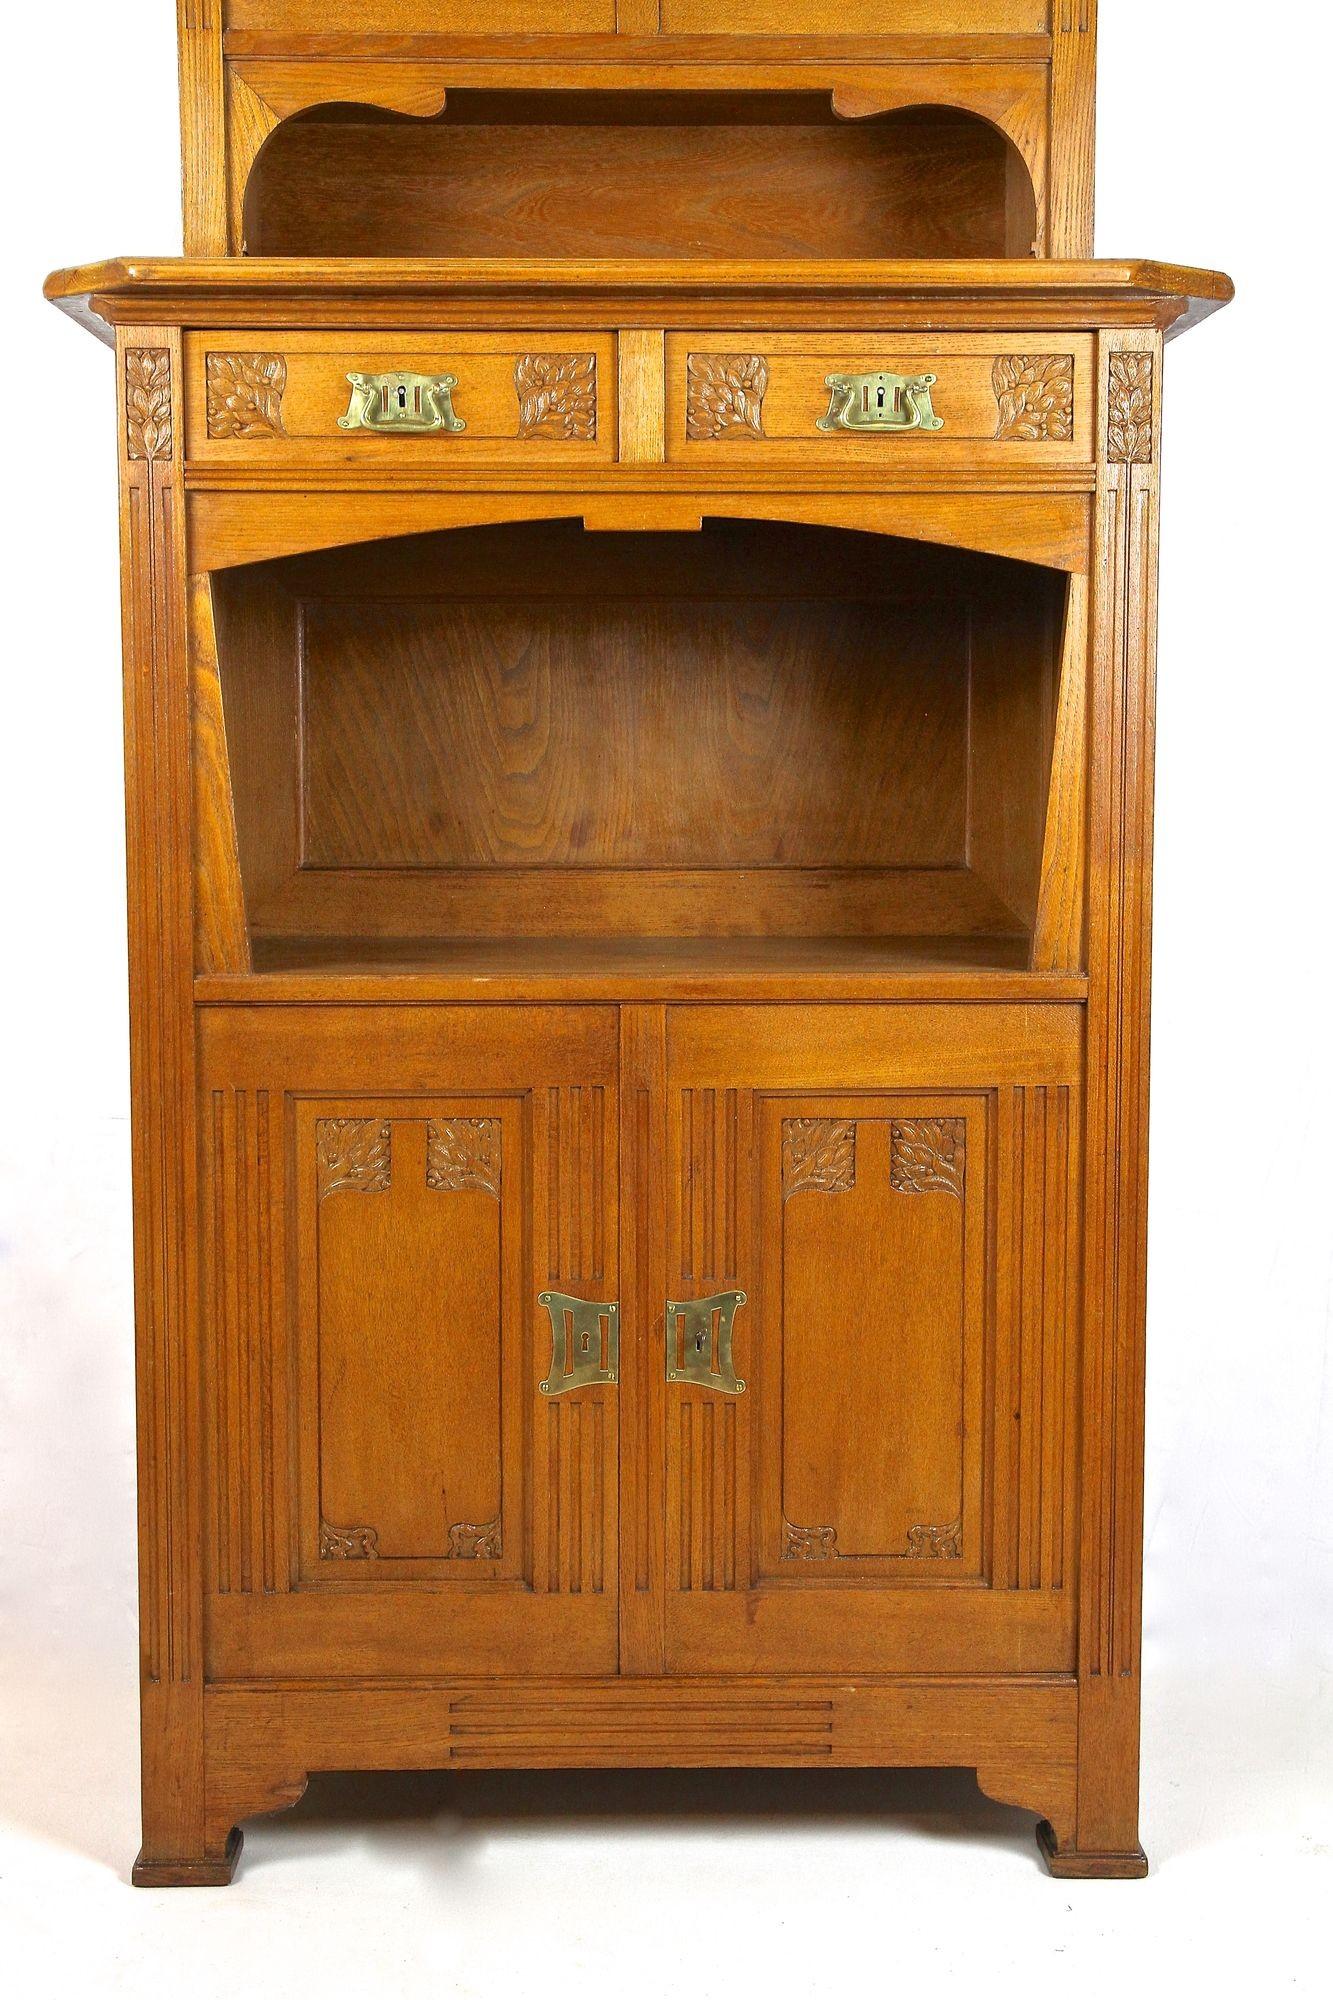 20th Century Art Nouveau Oakwood Cabinet/ Buffet With Tiffany Style Glass Inlays, AT ca 1910 For Sale